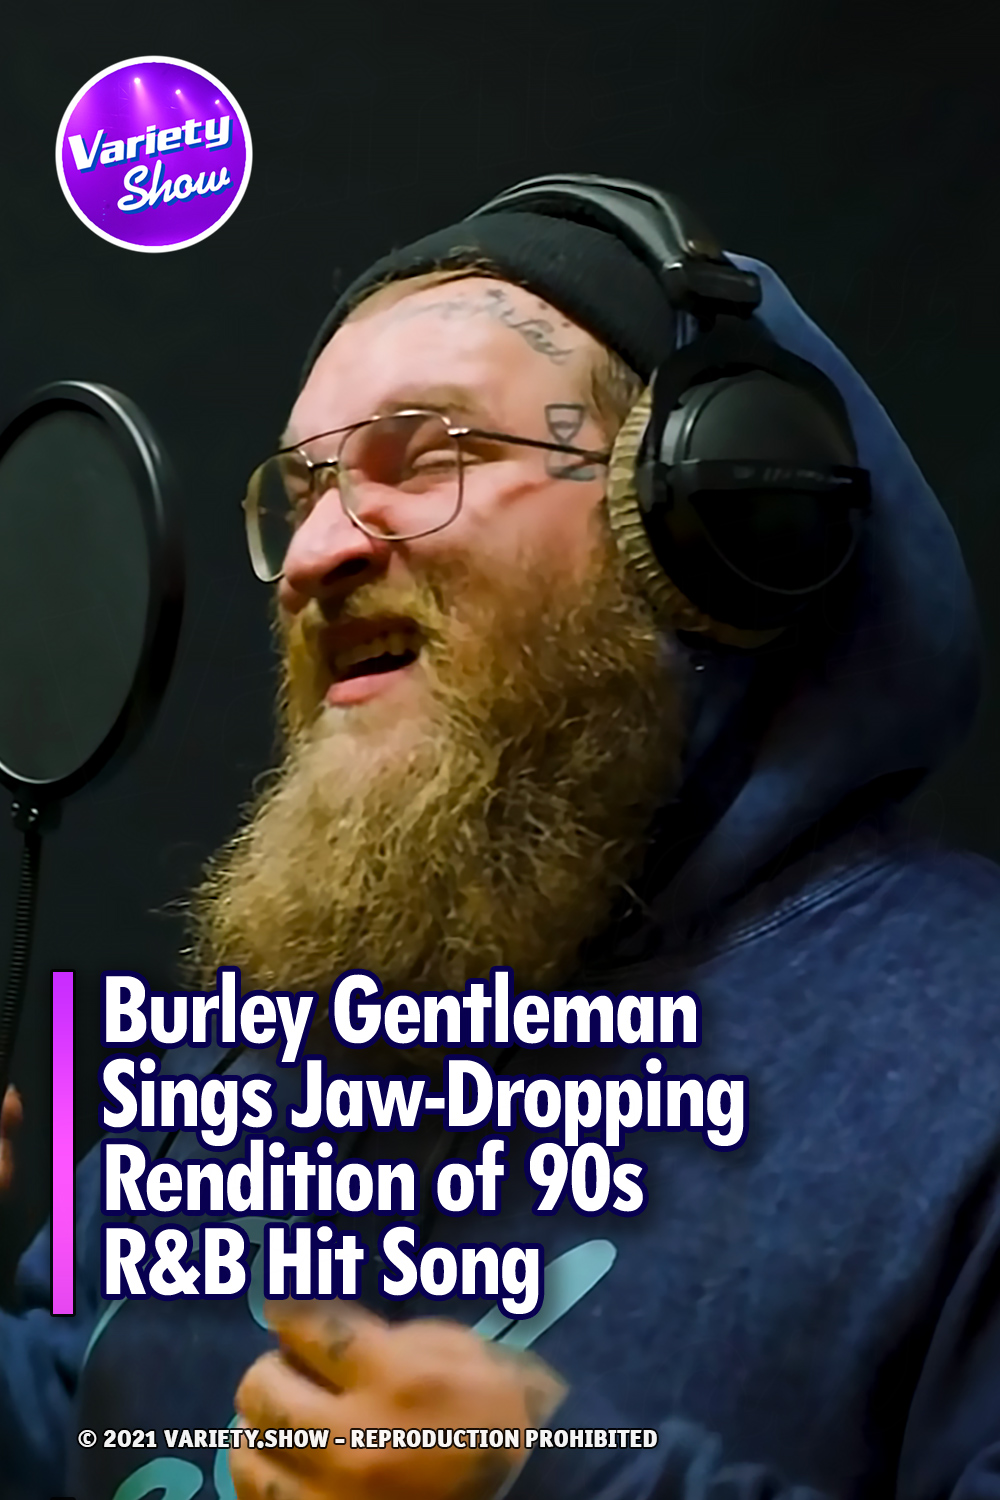 Burley Gentleman Sings Jaw-Dropping Rendition of 90s R&B Hit Song